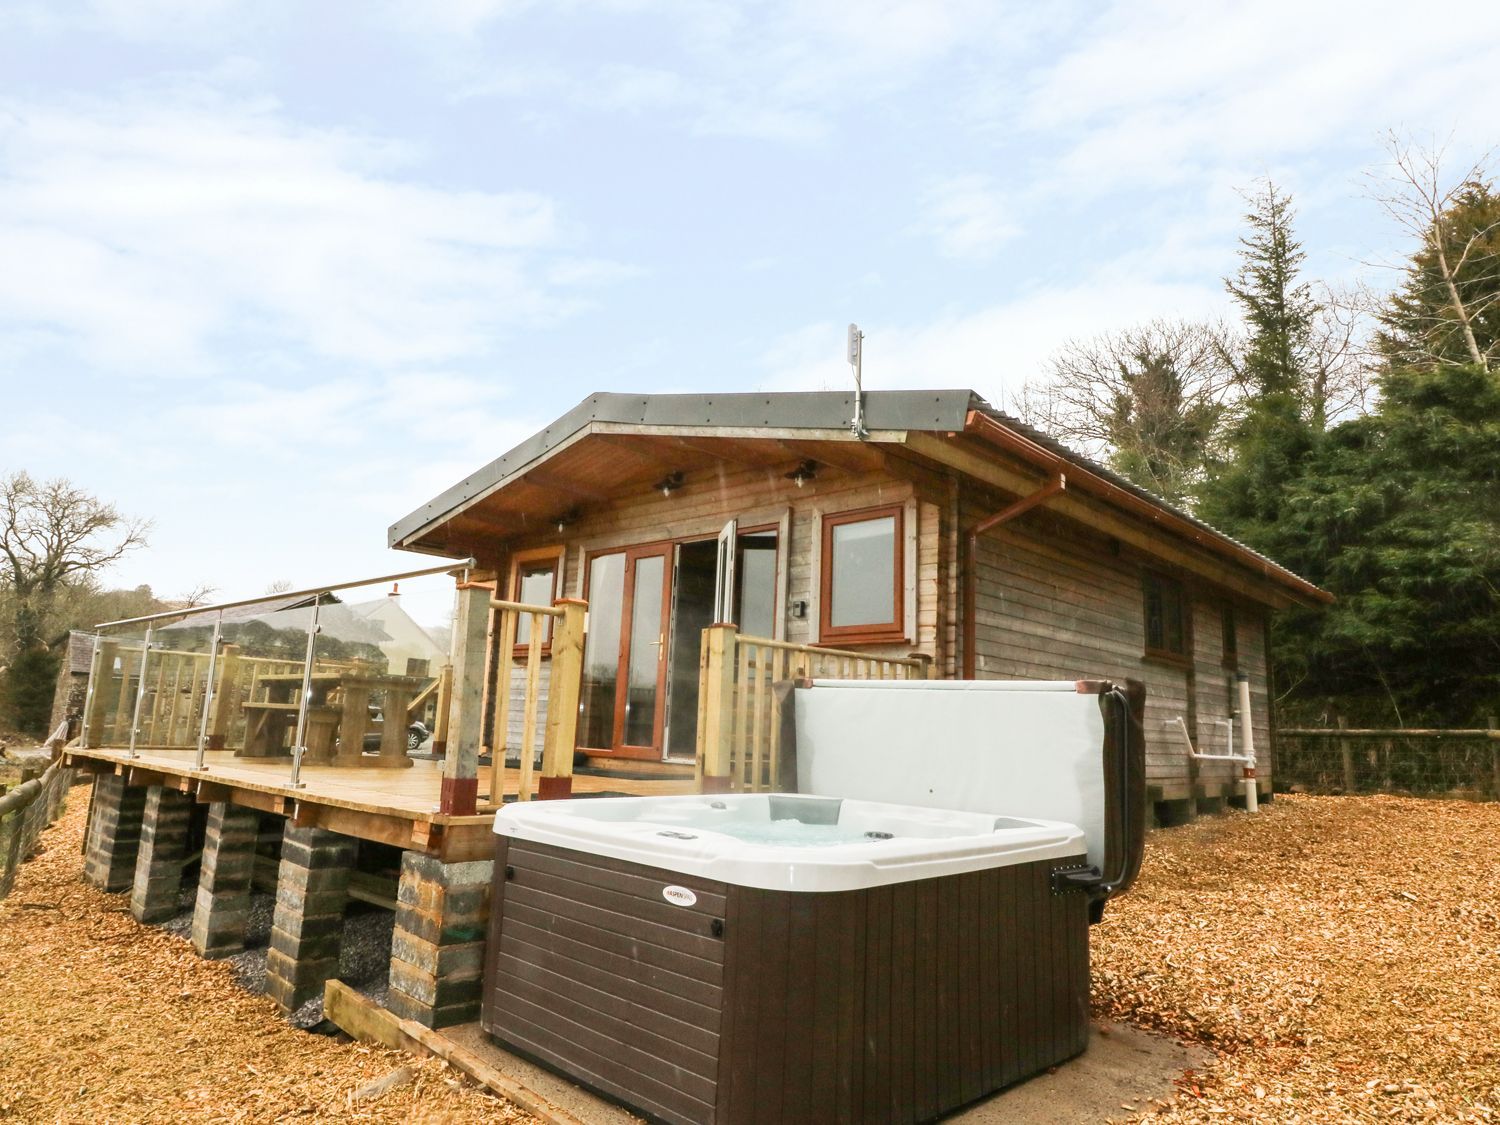 The Cabin Swansea, Pembrokeshire Self Catering Holiday Lodges